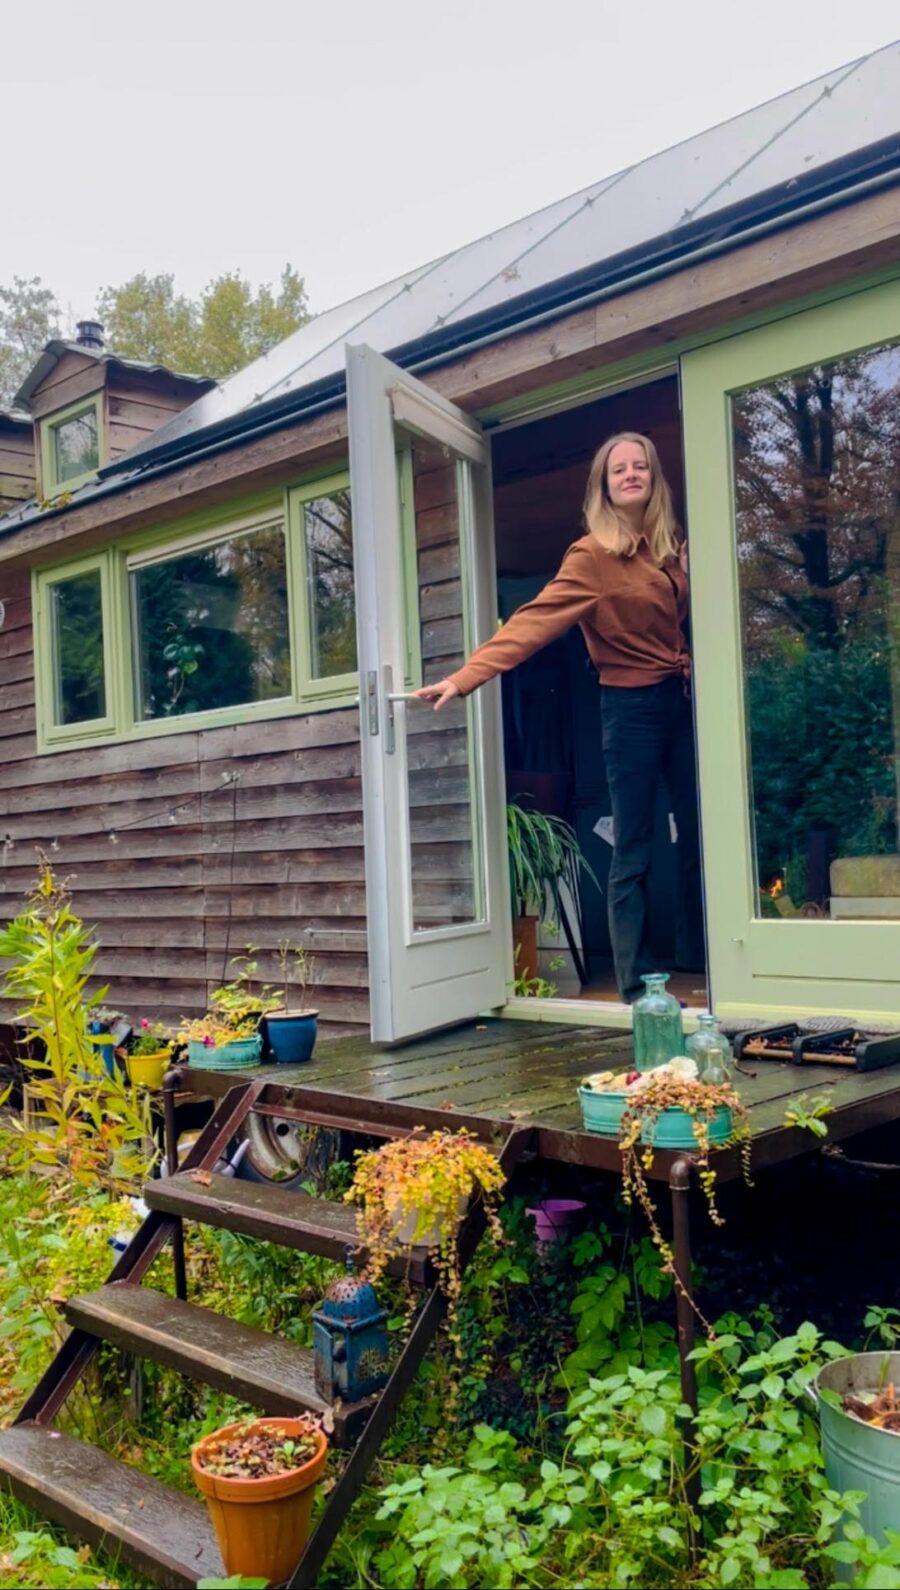 Her Beautiful DIY Tiny Home in the Netherlands